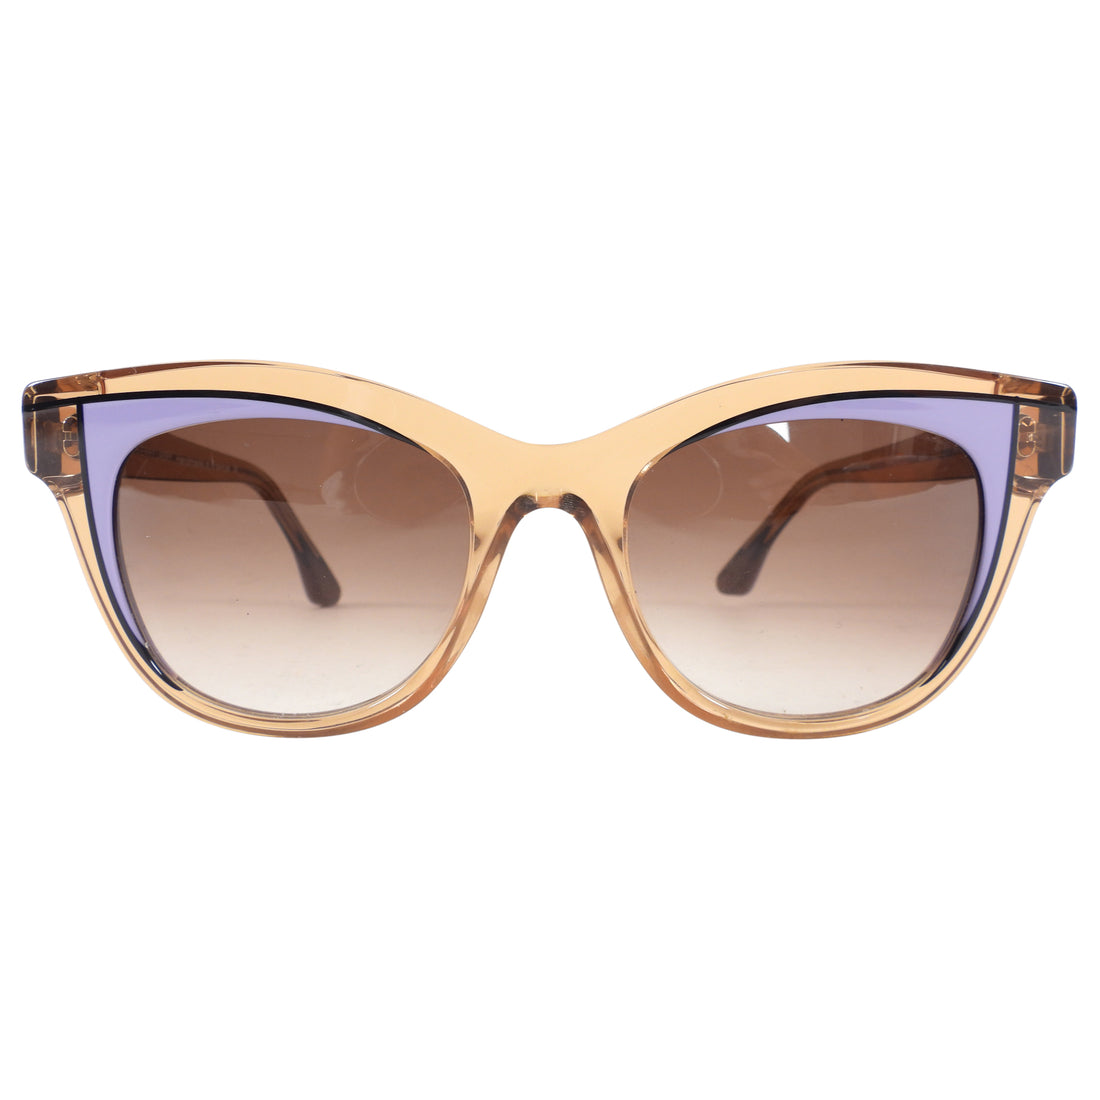 Thierry Lasry Brown and Purple Sunglasses